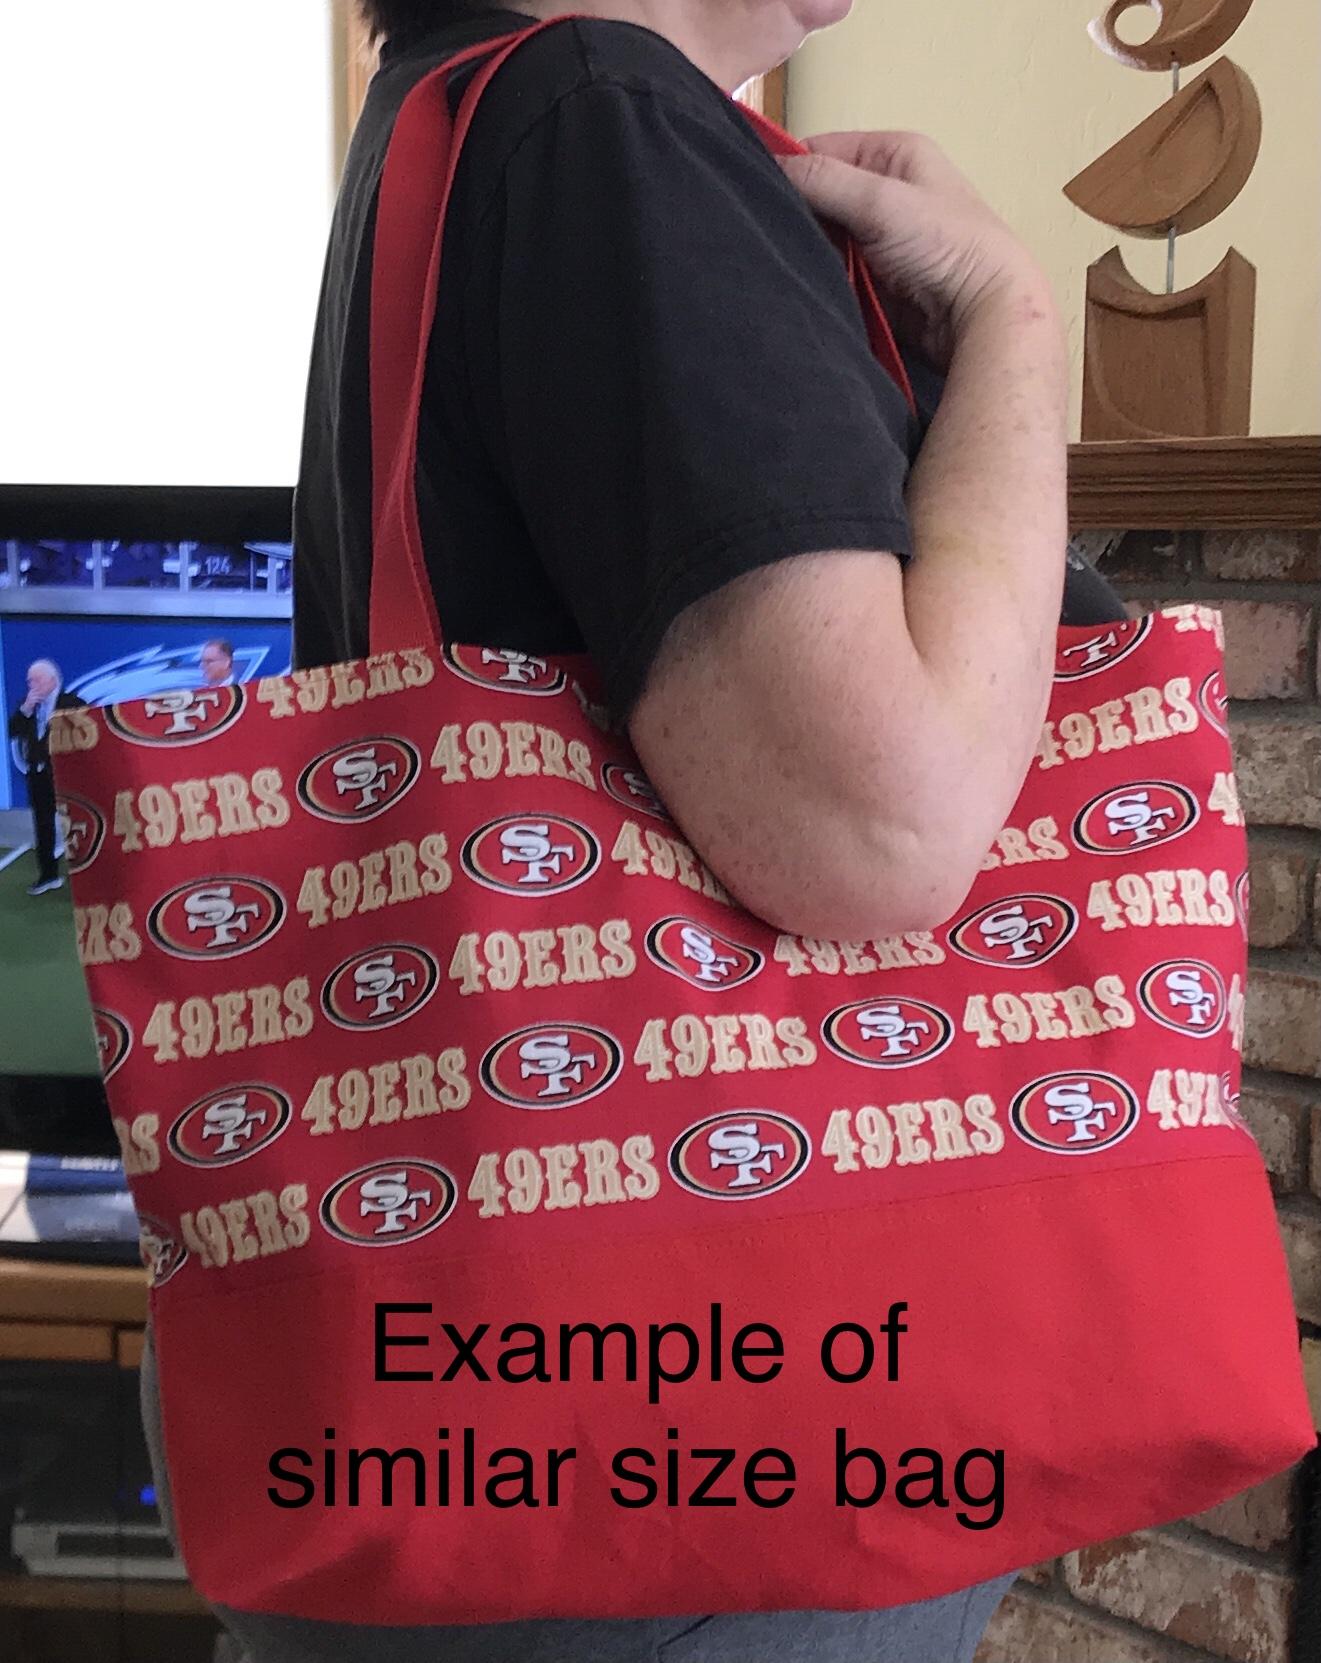 Example of similar bag to show size while carrying over shoulder